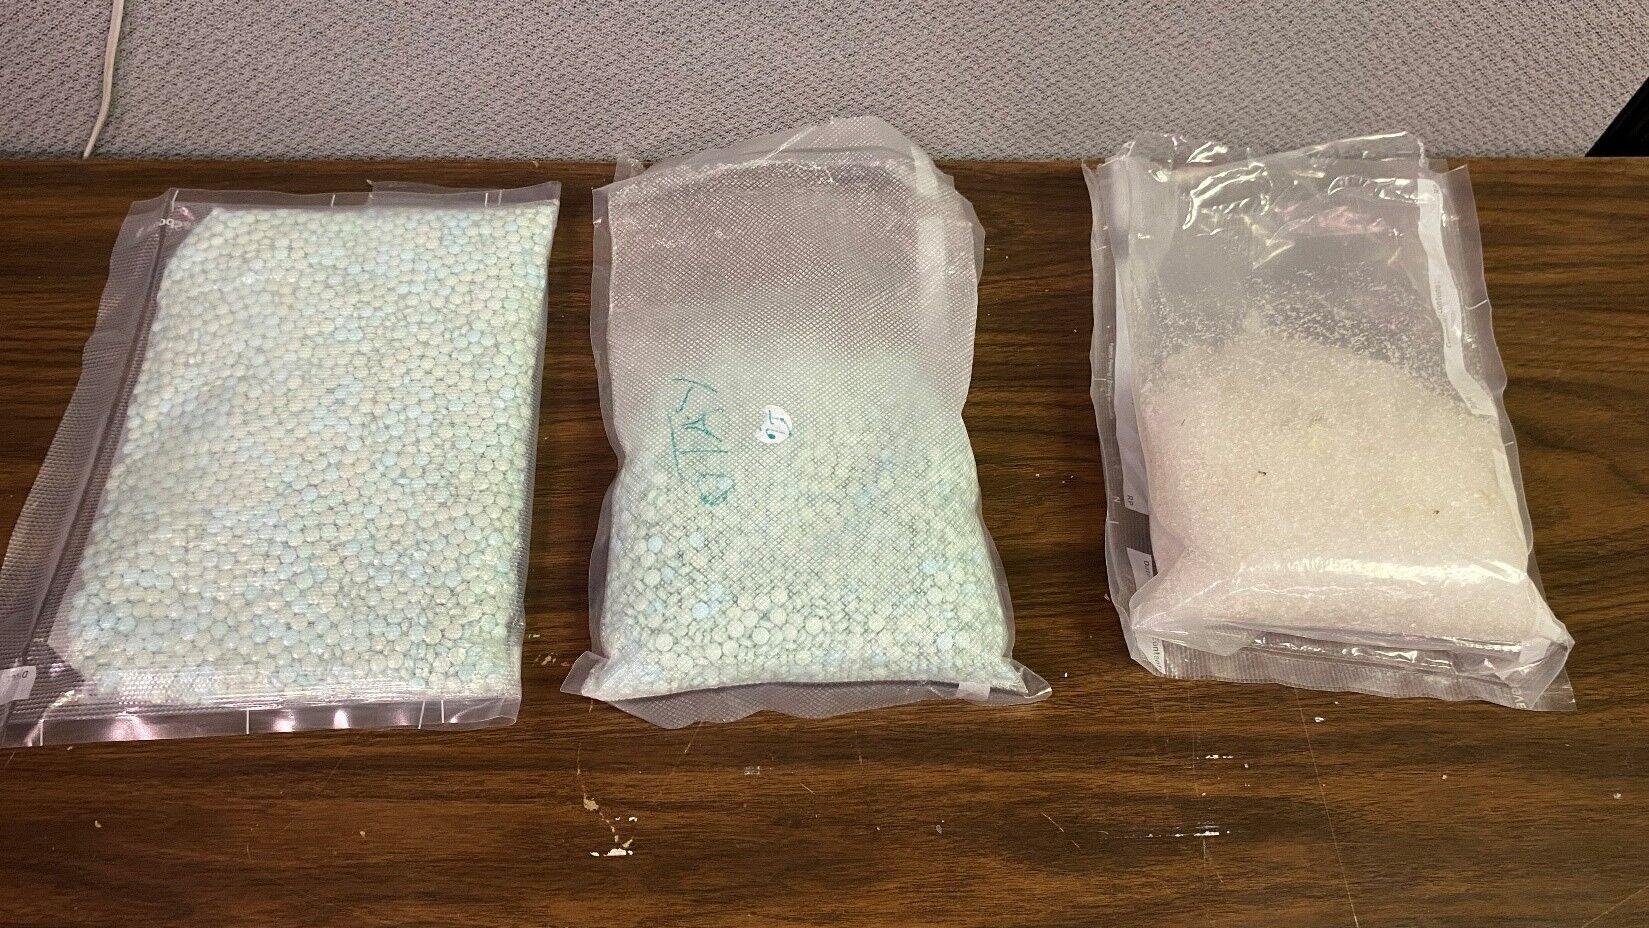 Alleged fentanyl pills seized in a barber shop, January 2023. Source: Tupelo Police Department